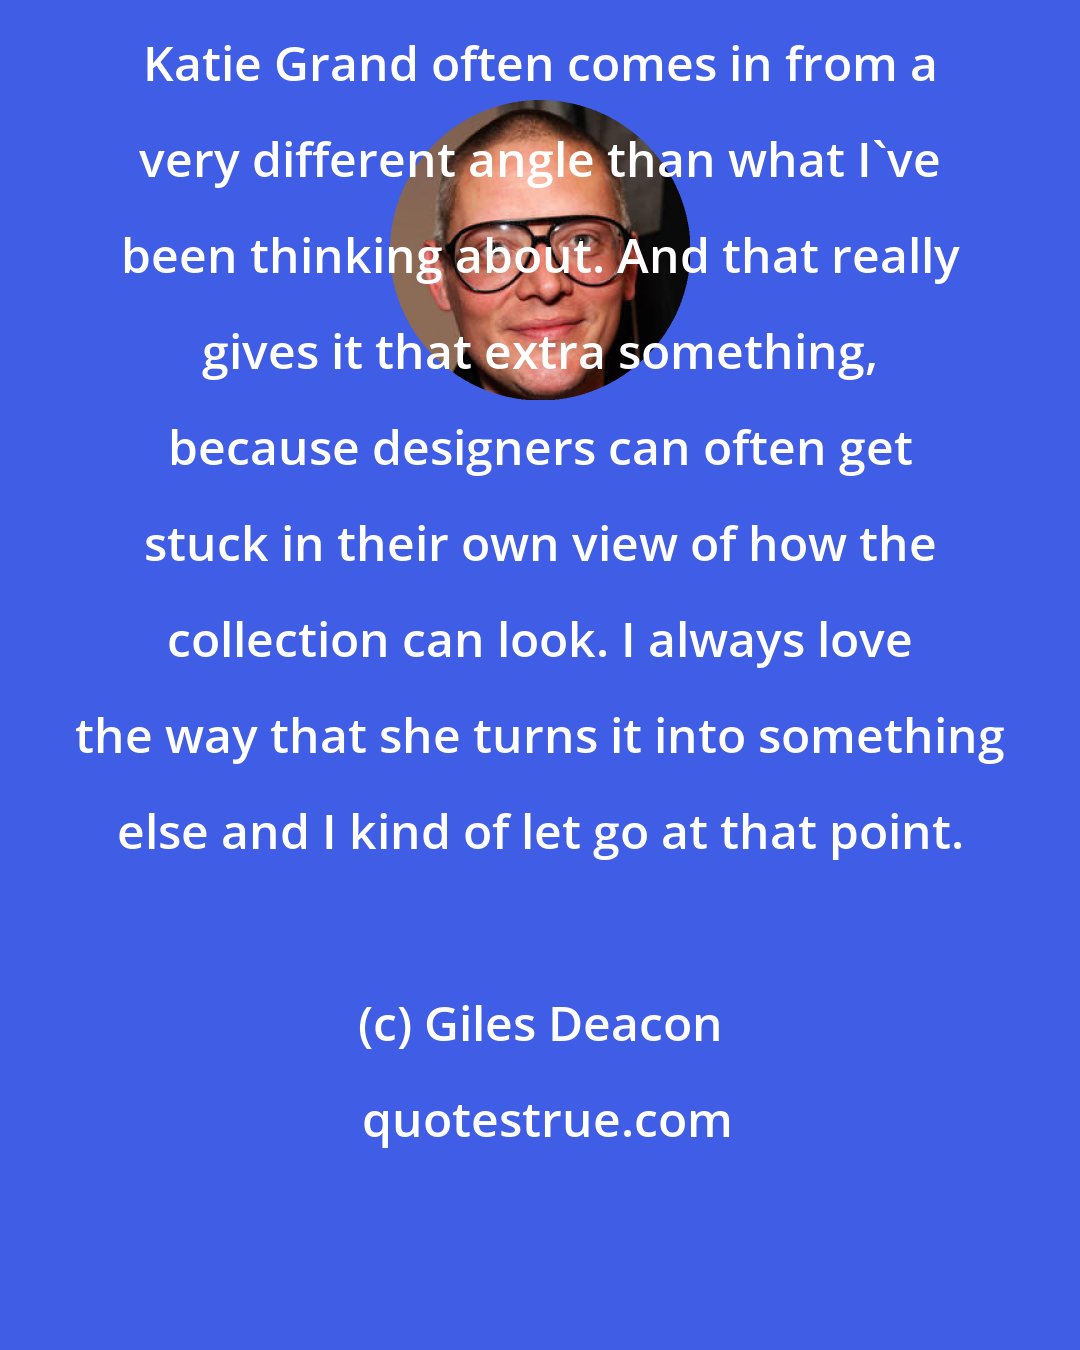 Giles Deacon: Katie Grand often comes in from a very different angle than what I've been thinking about. And that really gives it that extra something, because designers can often get stuck in their own view of how the collection can look. I always love the way that she turns it into something else and I kind of let go at that point.